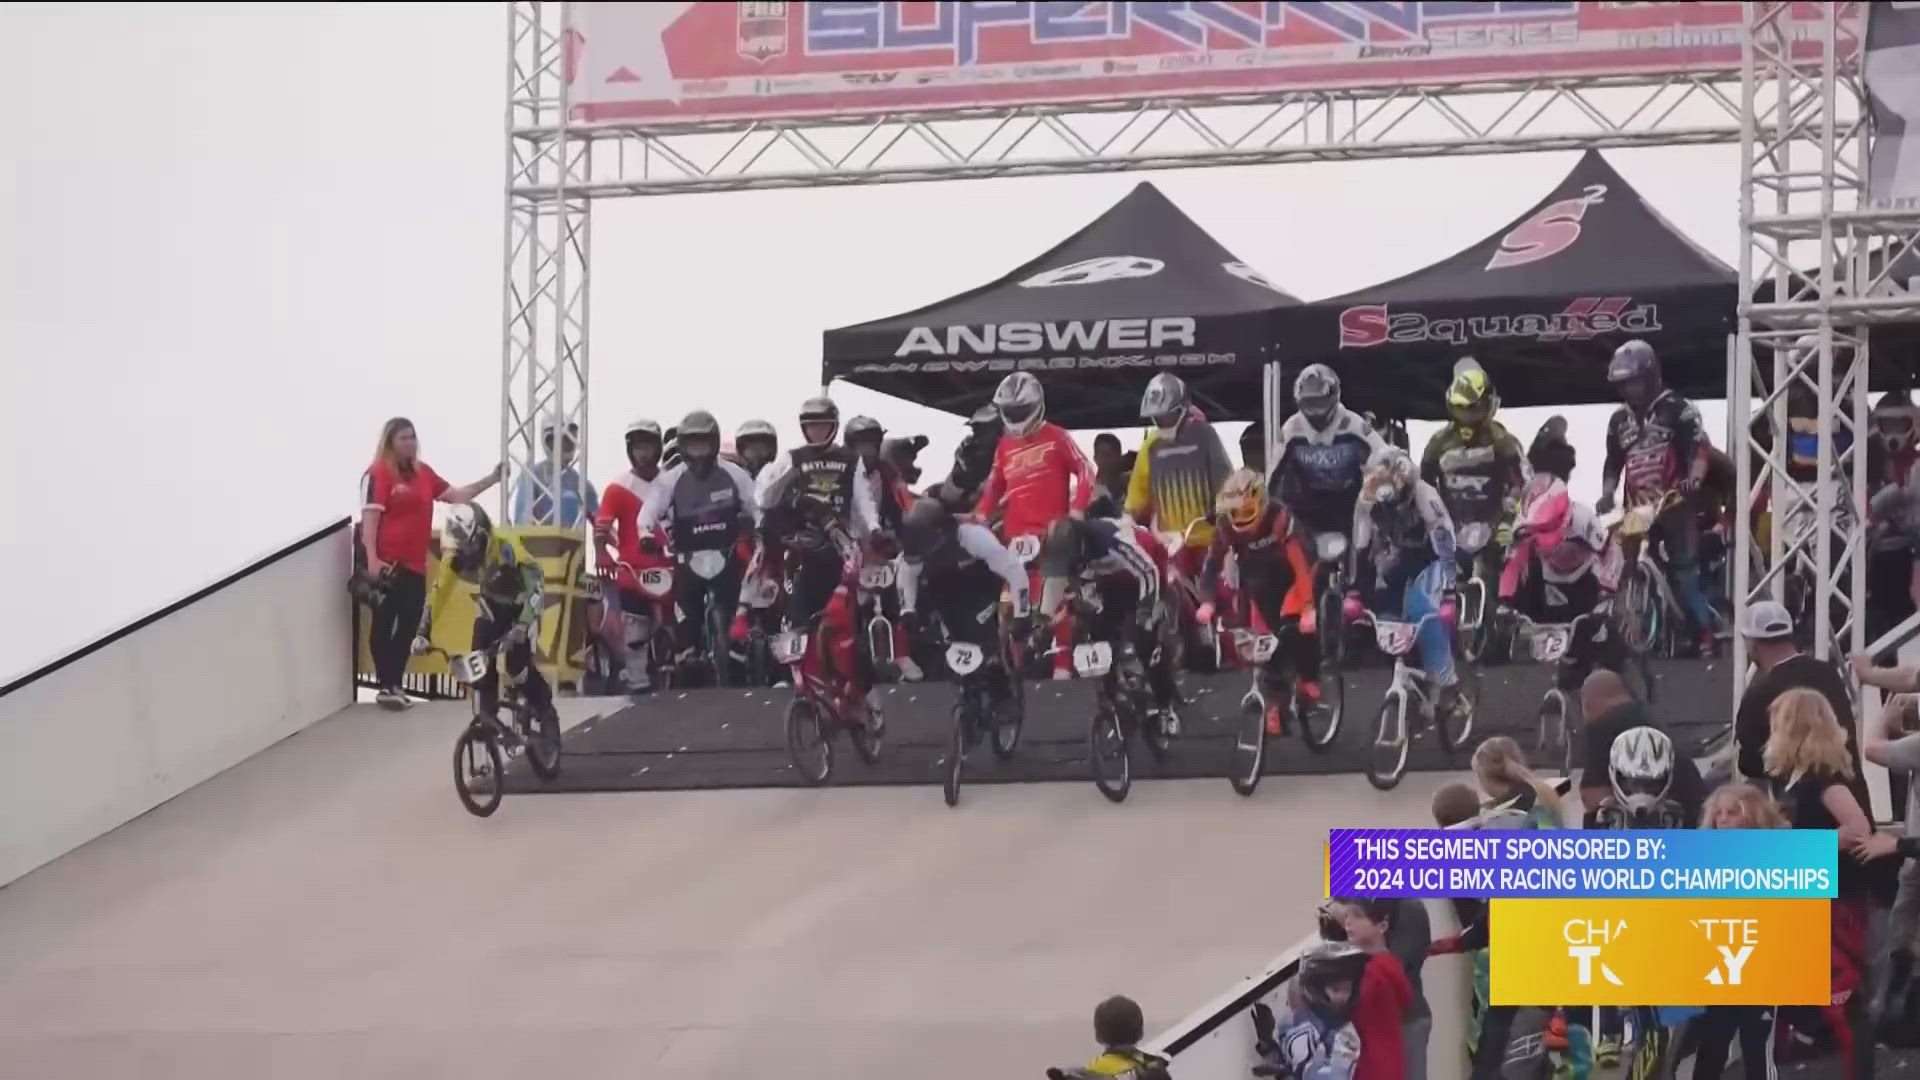 Come and join the excitement and fun of BMX World Racing